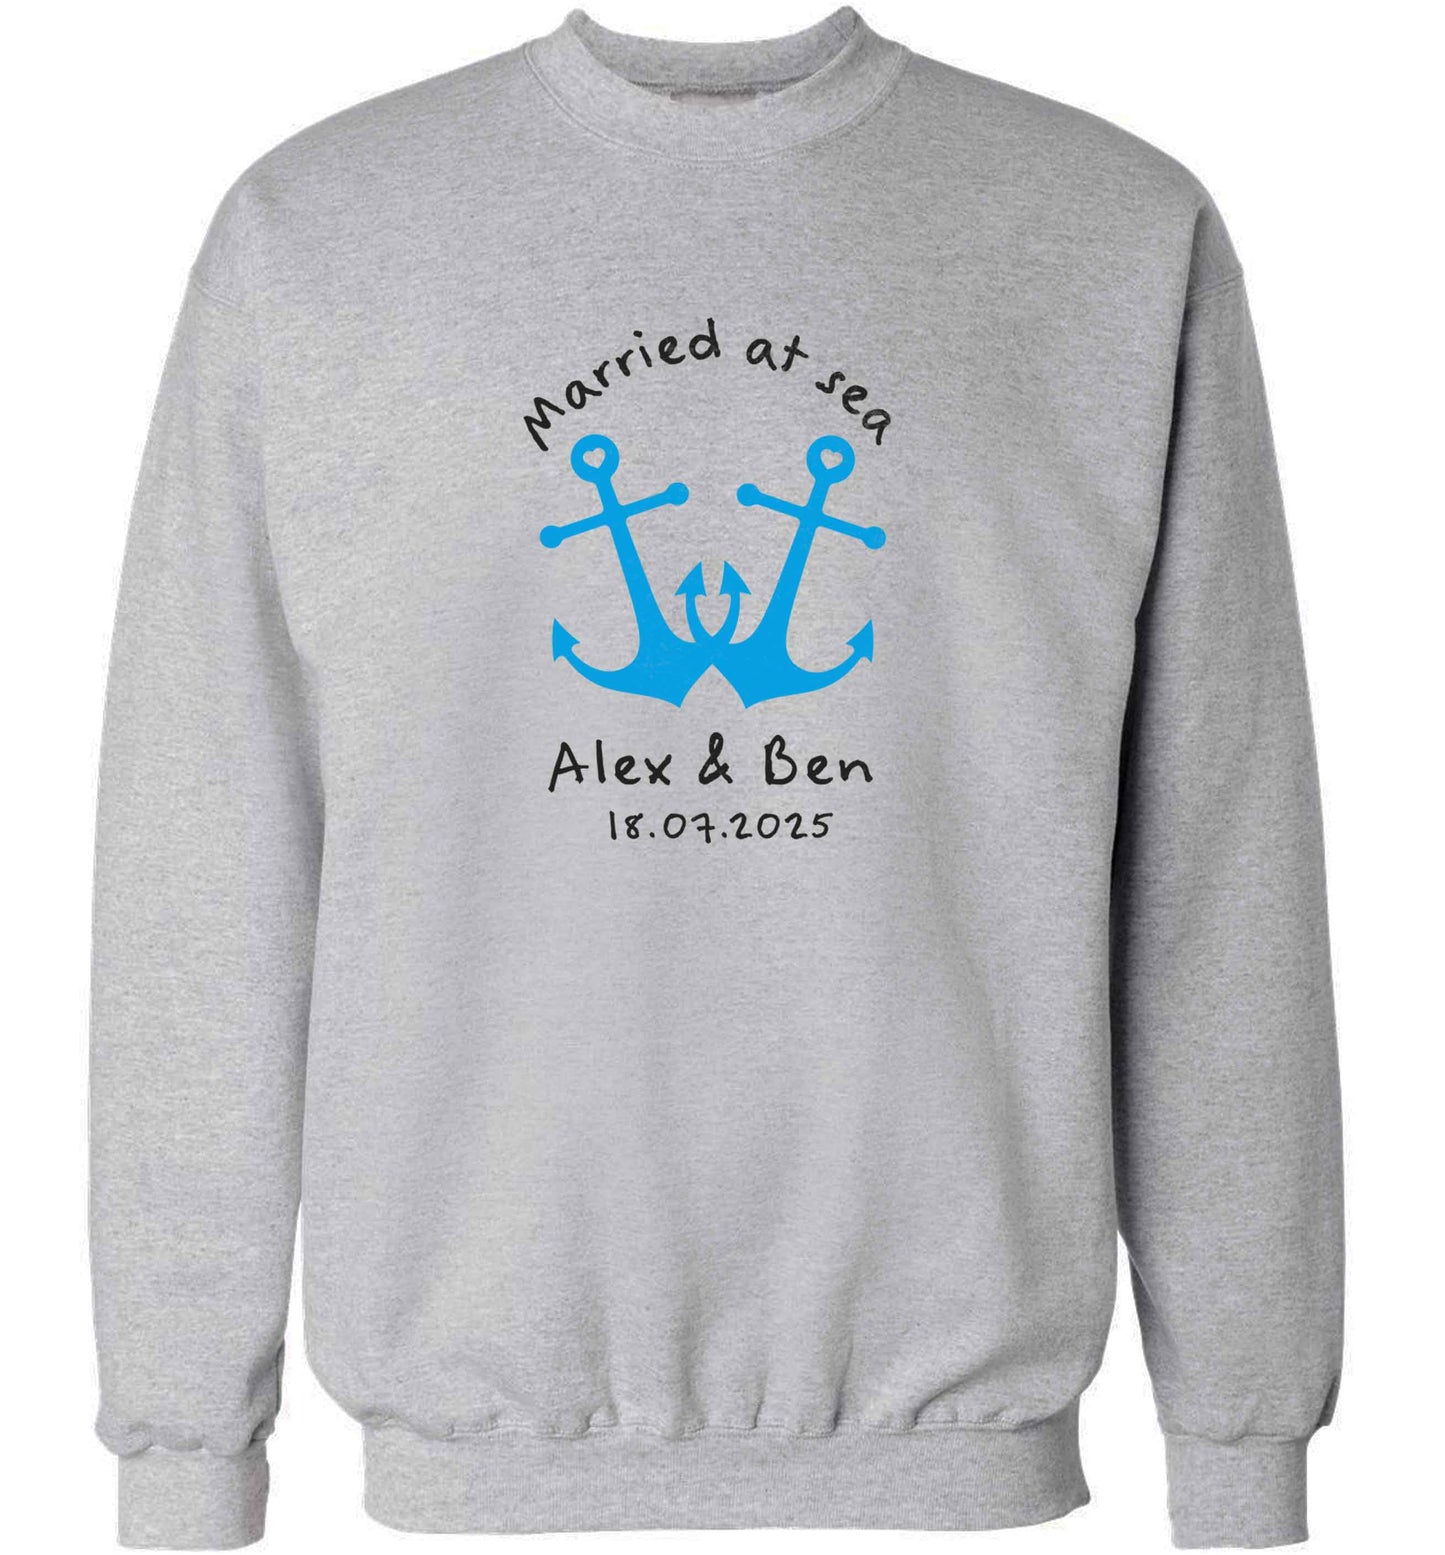 Married at sea blue anchors adult's unisex grey sweater 2XL